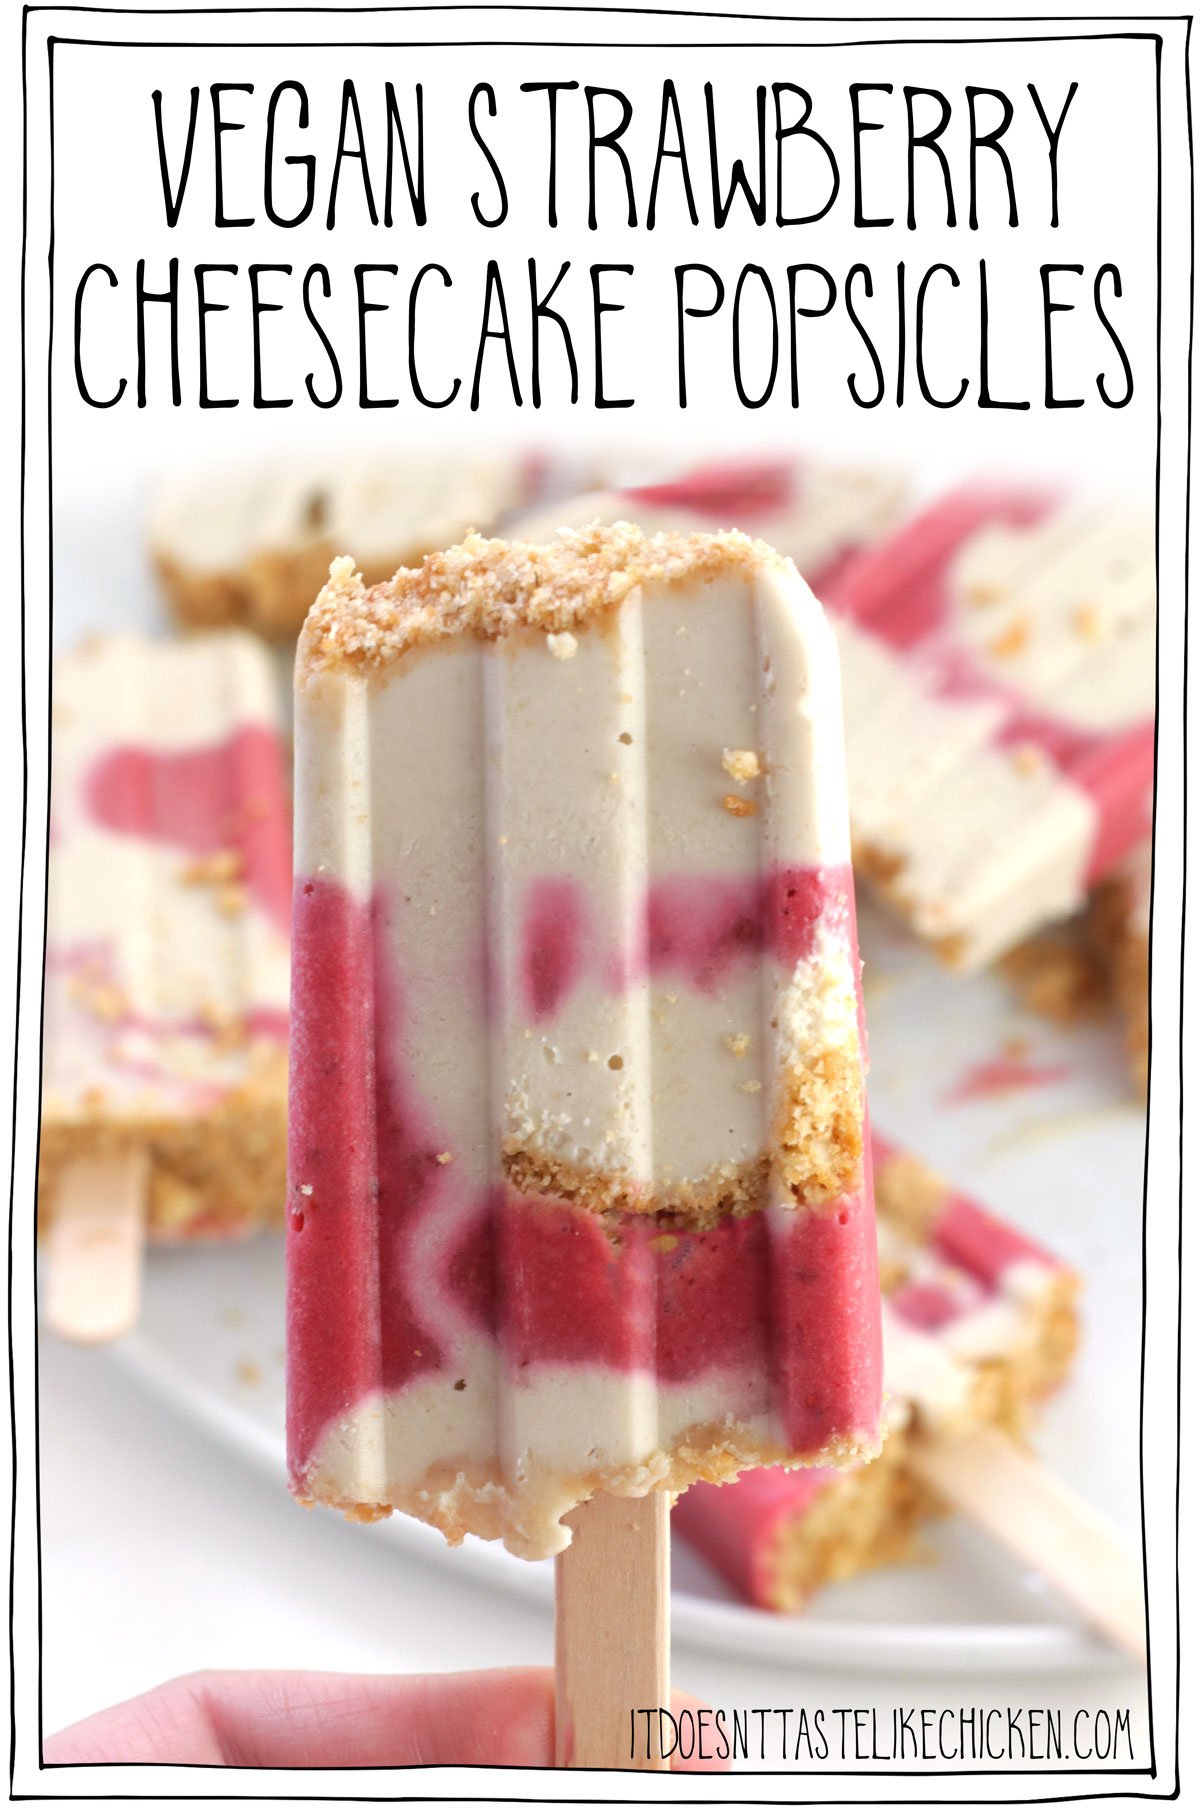 Vegan Strawberry Cheesecake Popsicles! These taste just like strawberry cheesecake- but on a stick! ... and frozen! I'm obsessed. It's a little shocking how just 8 ingredients and only 15 minutes of your time is all it takes to whip up the delicious treats. Just blend, pour, and freeze. #itdoesnttastelikechicken #veganrecipes #dairyfree